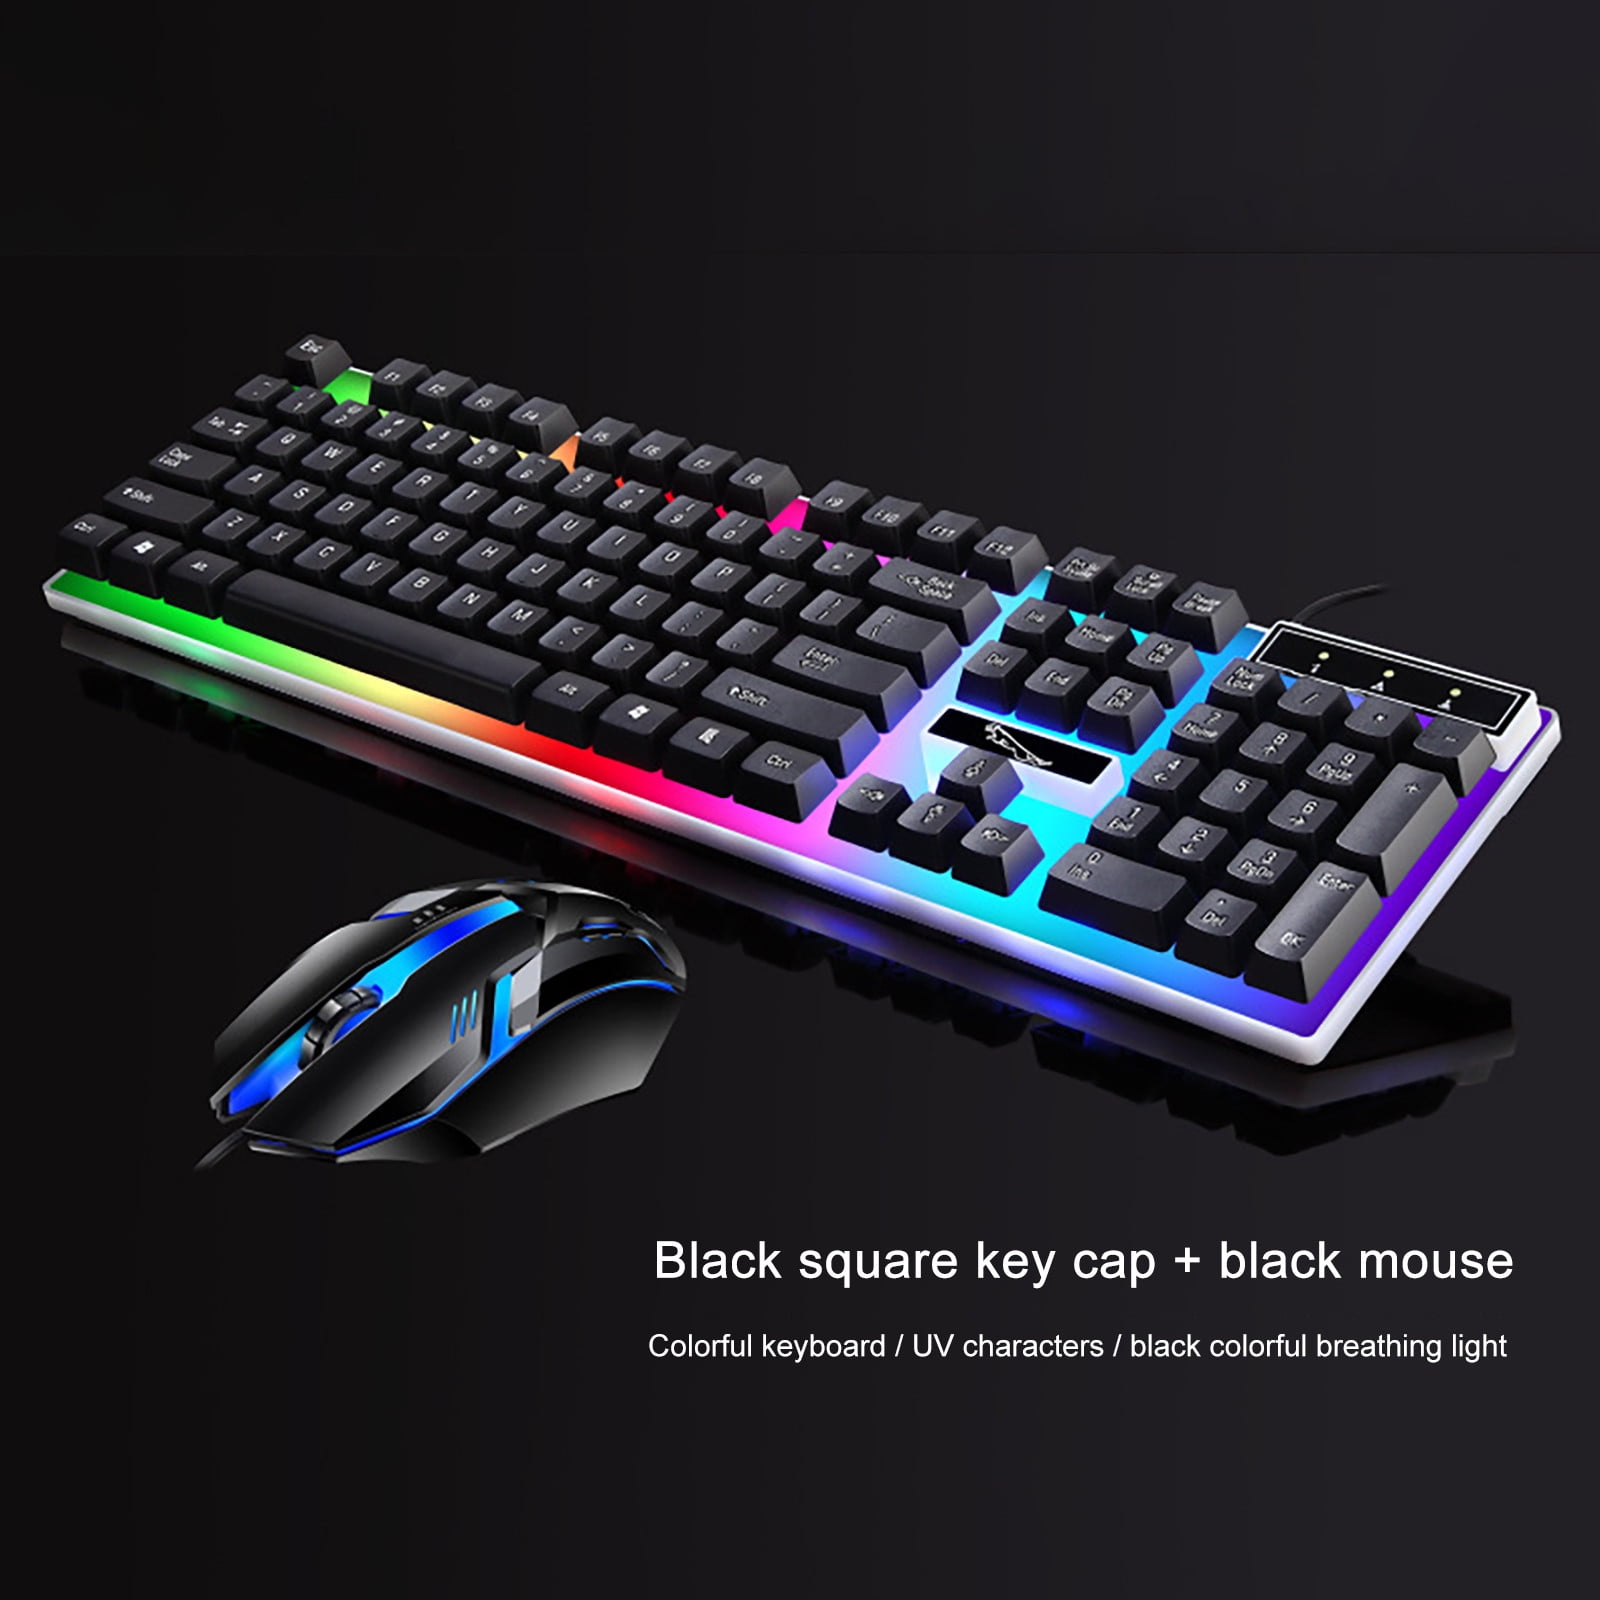 RPM Euro Games Gaming Keyboard and Mouse Combo, Keyboard - With 7 Color  Backlit, Suspension Caps, Backlit, 104 Keys, Mouse - 4 DPI Levels, 6  Buttons